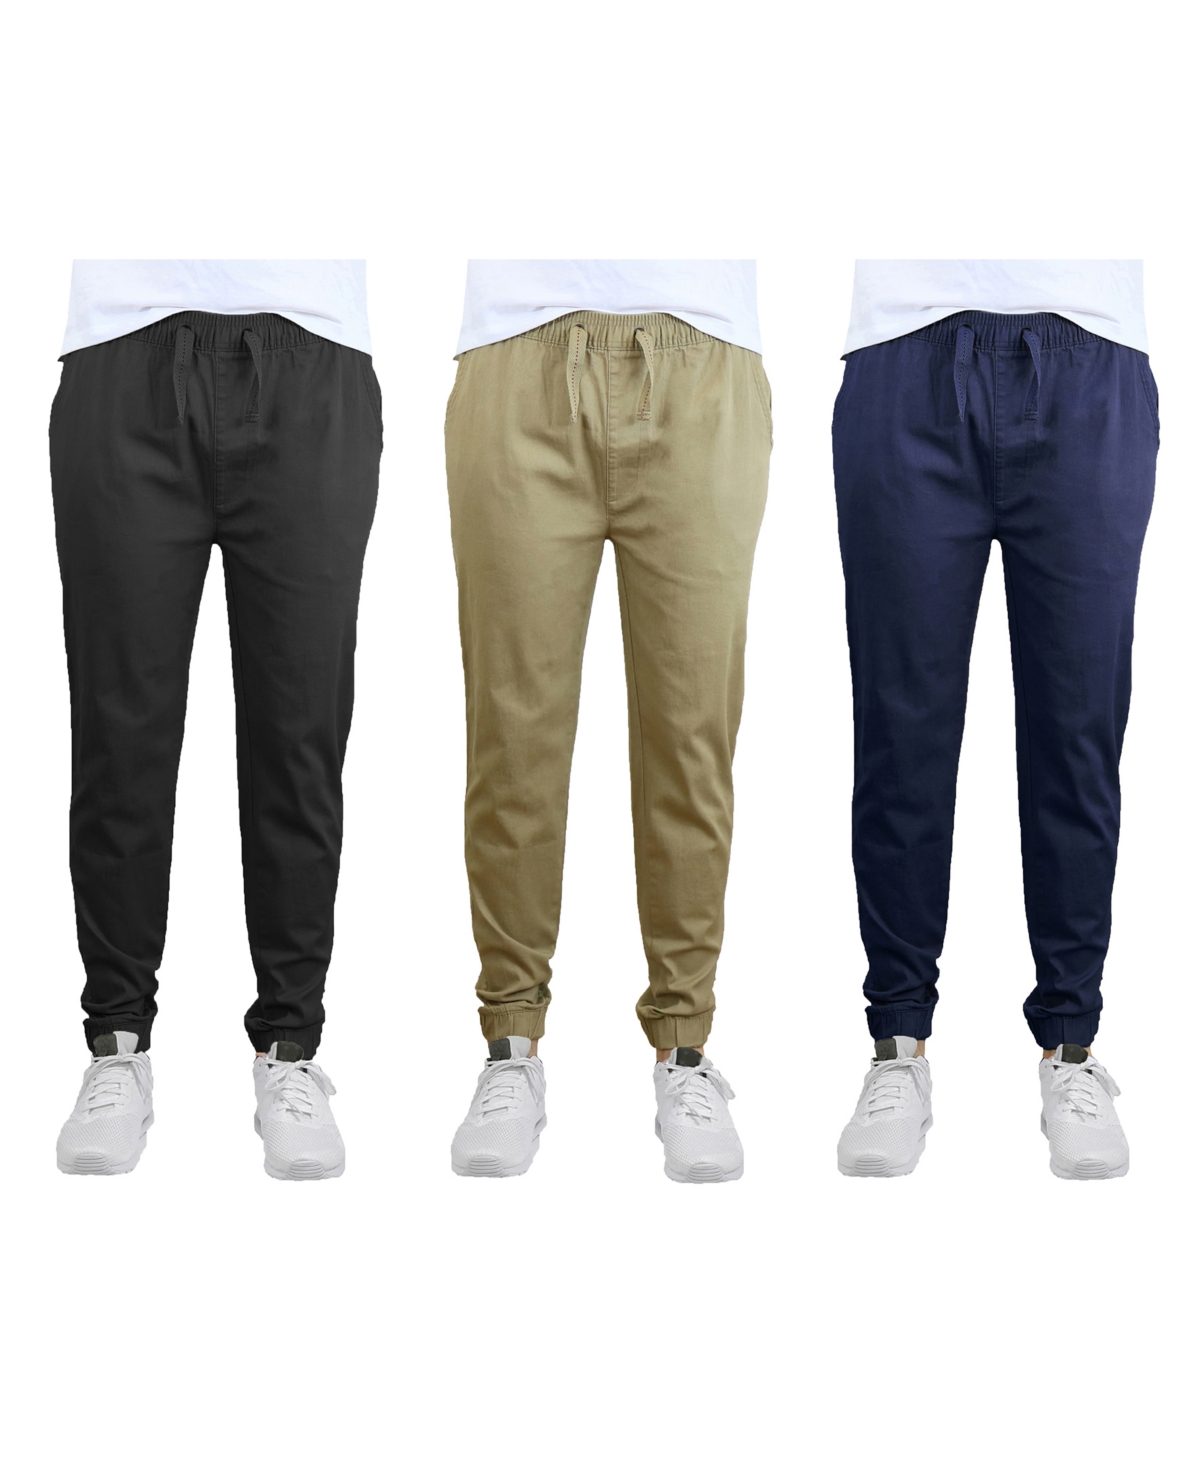 Shop Galaxy By Harvic Men's Slim Fit Basic Stretch Twill Joggers, Pack Of 3 In Black,khaki And Navy